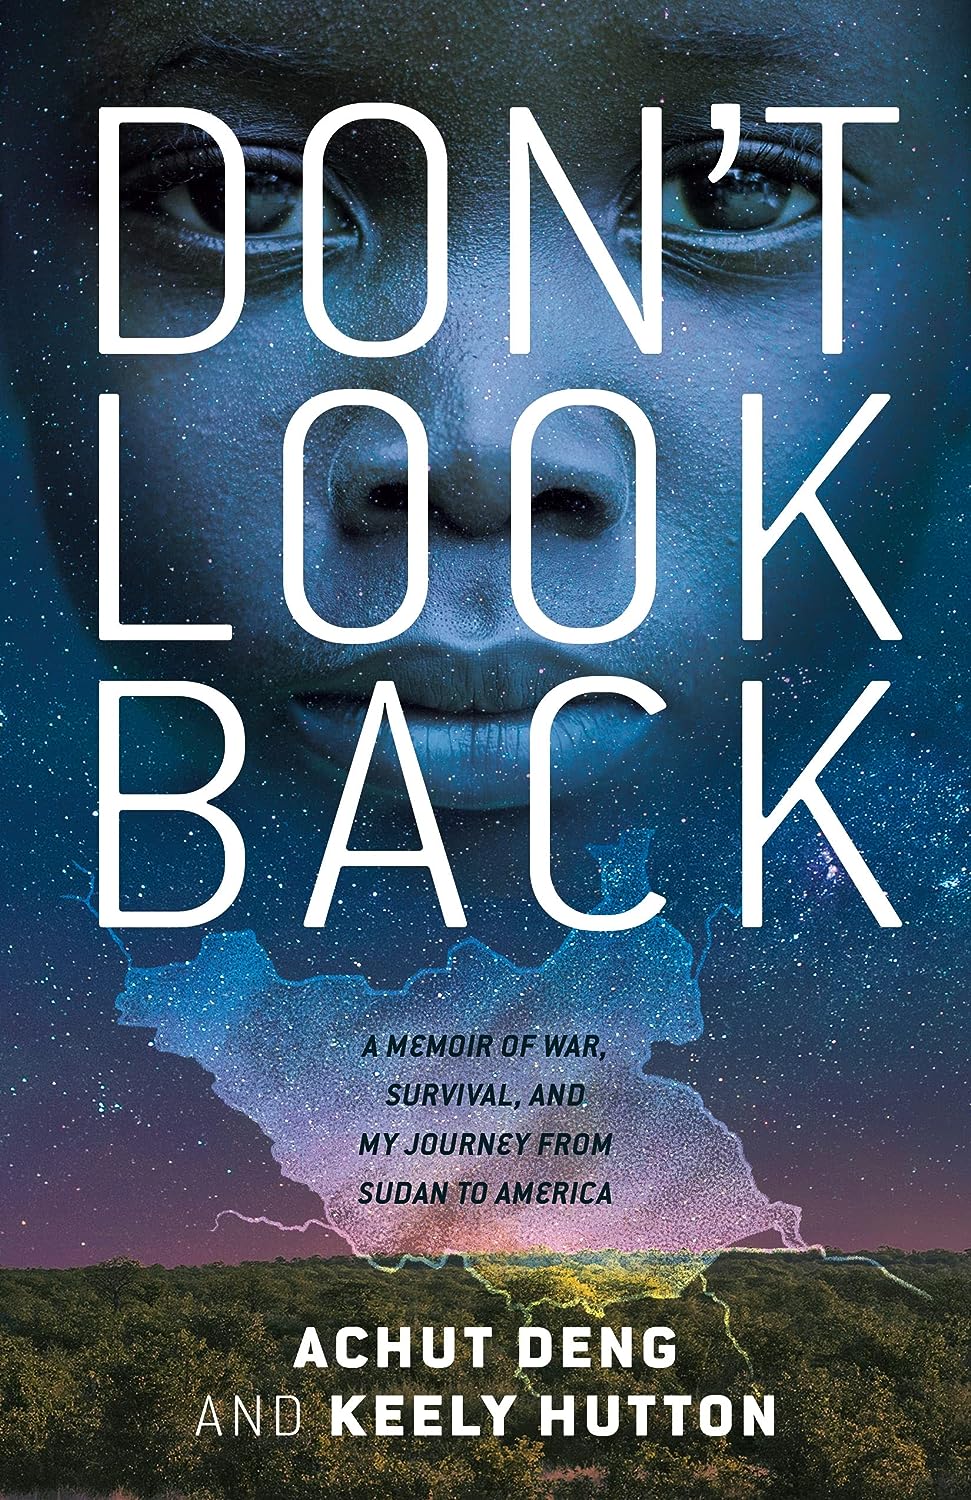 BookPal　America　Journey　from　Look　to　A　Don't　Sudan　My　War,　and　Back:　Survival,　of　Memoir　Hardcover